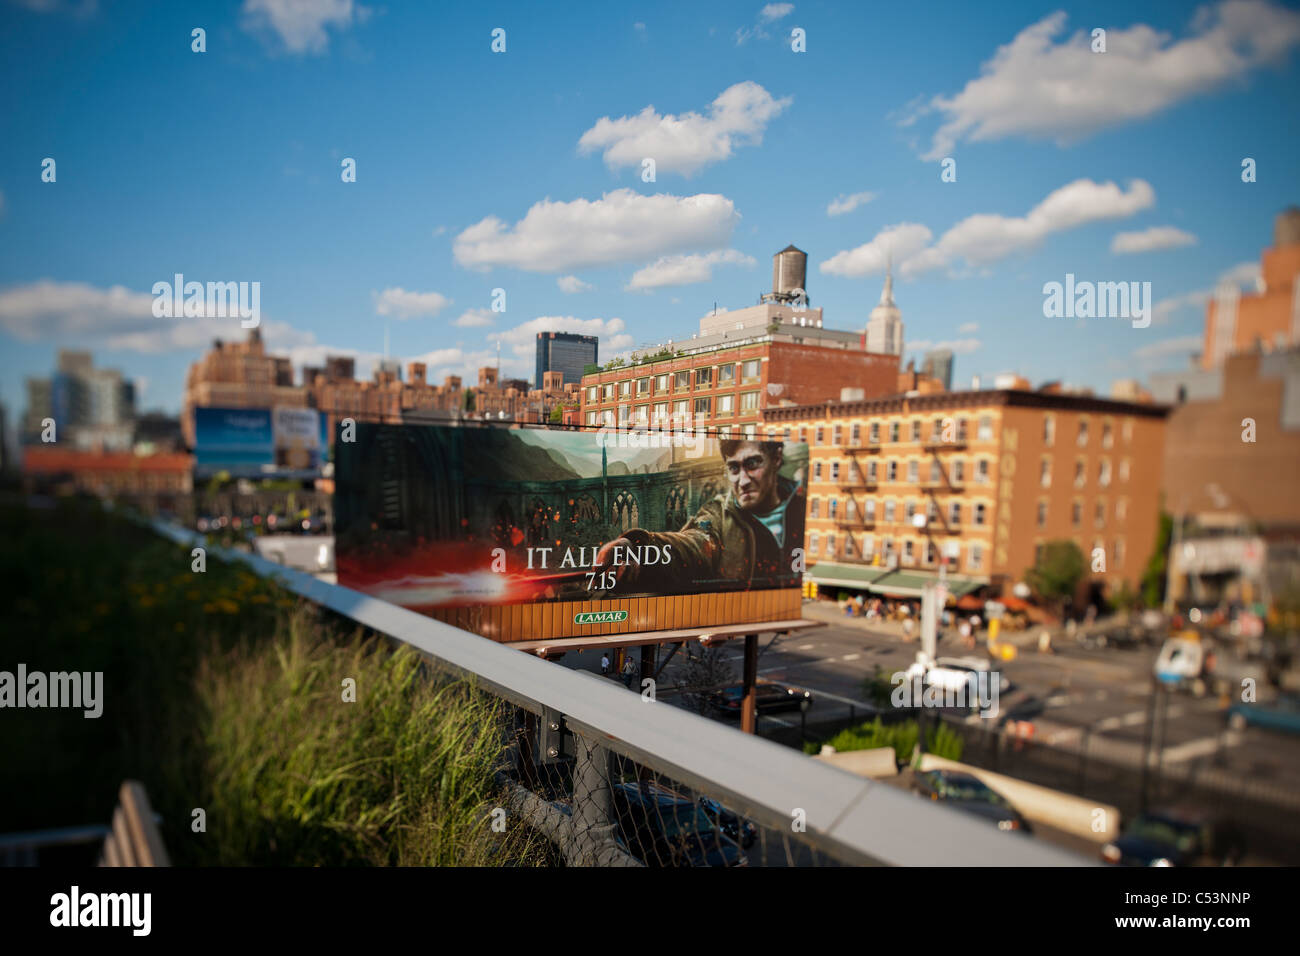 A billboard advertises the new 'Harry Potter and the Deathly Hallows-Part 2' film along the popular High Line Park in New York Stock Photo